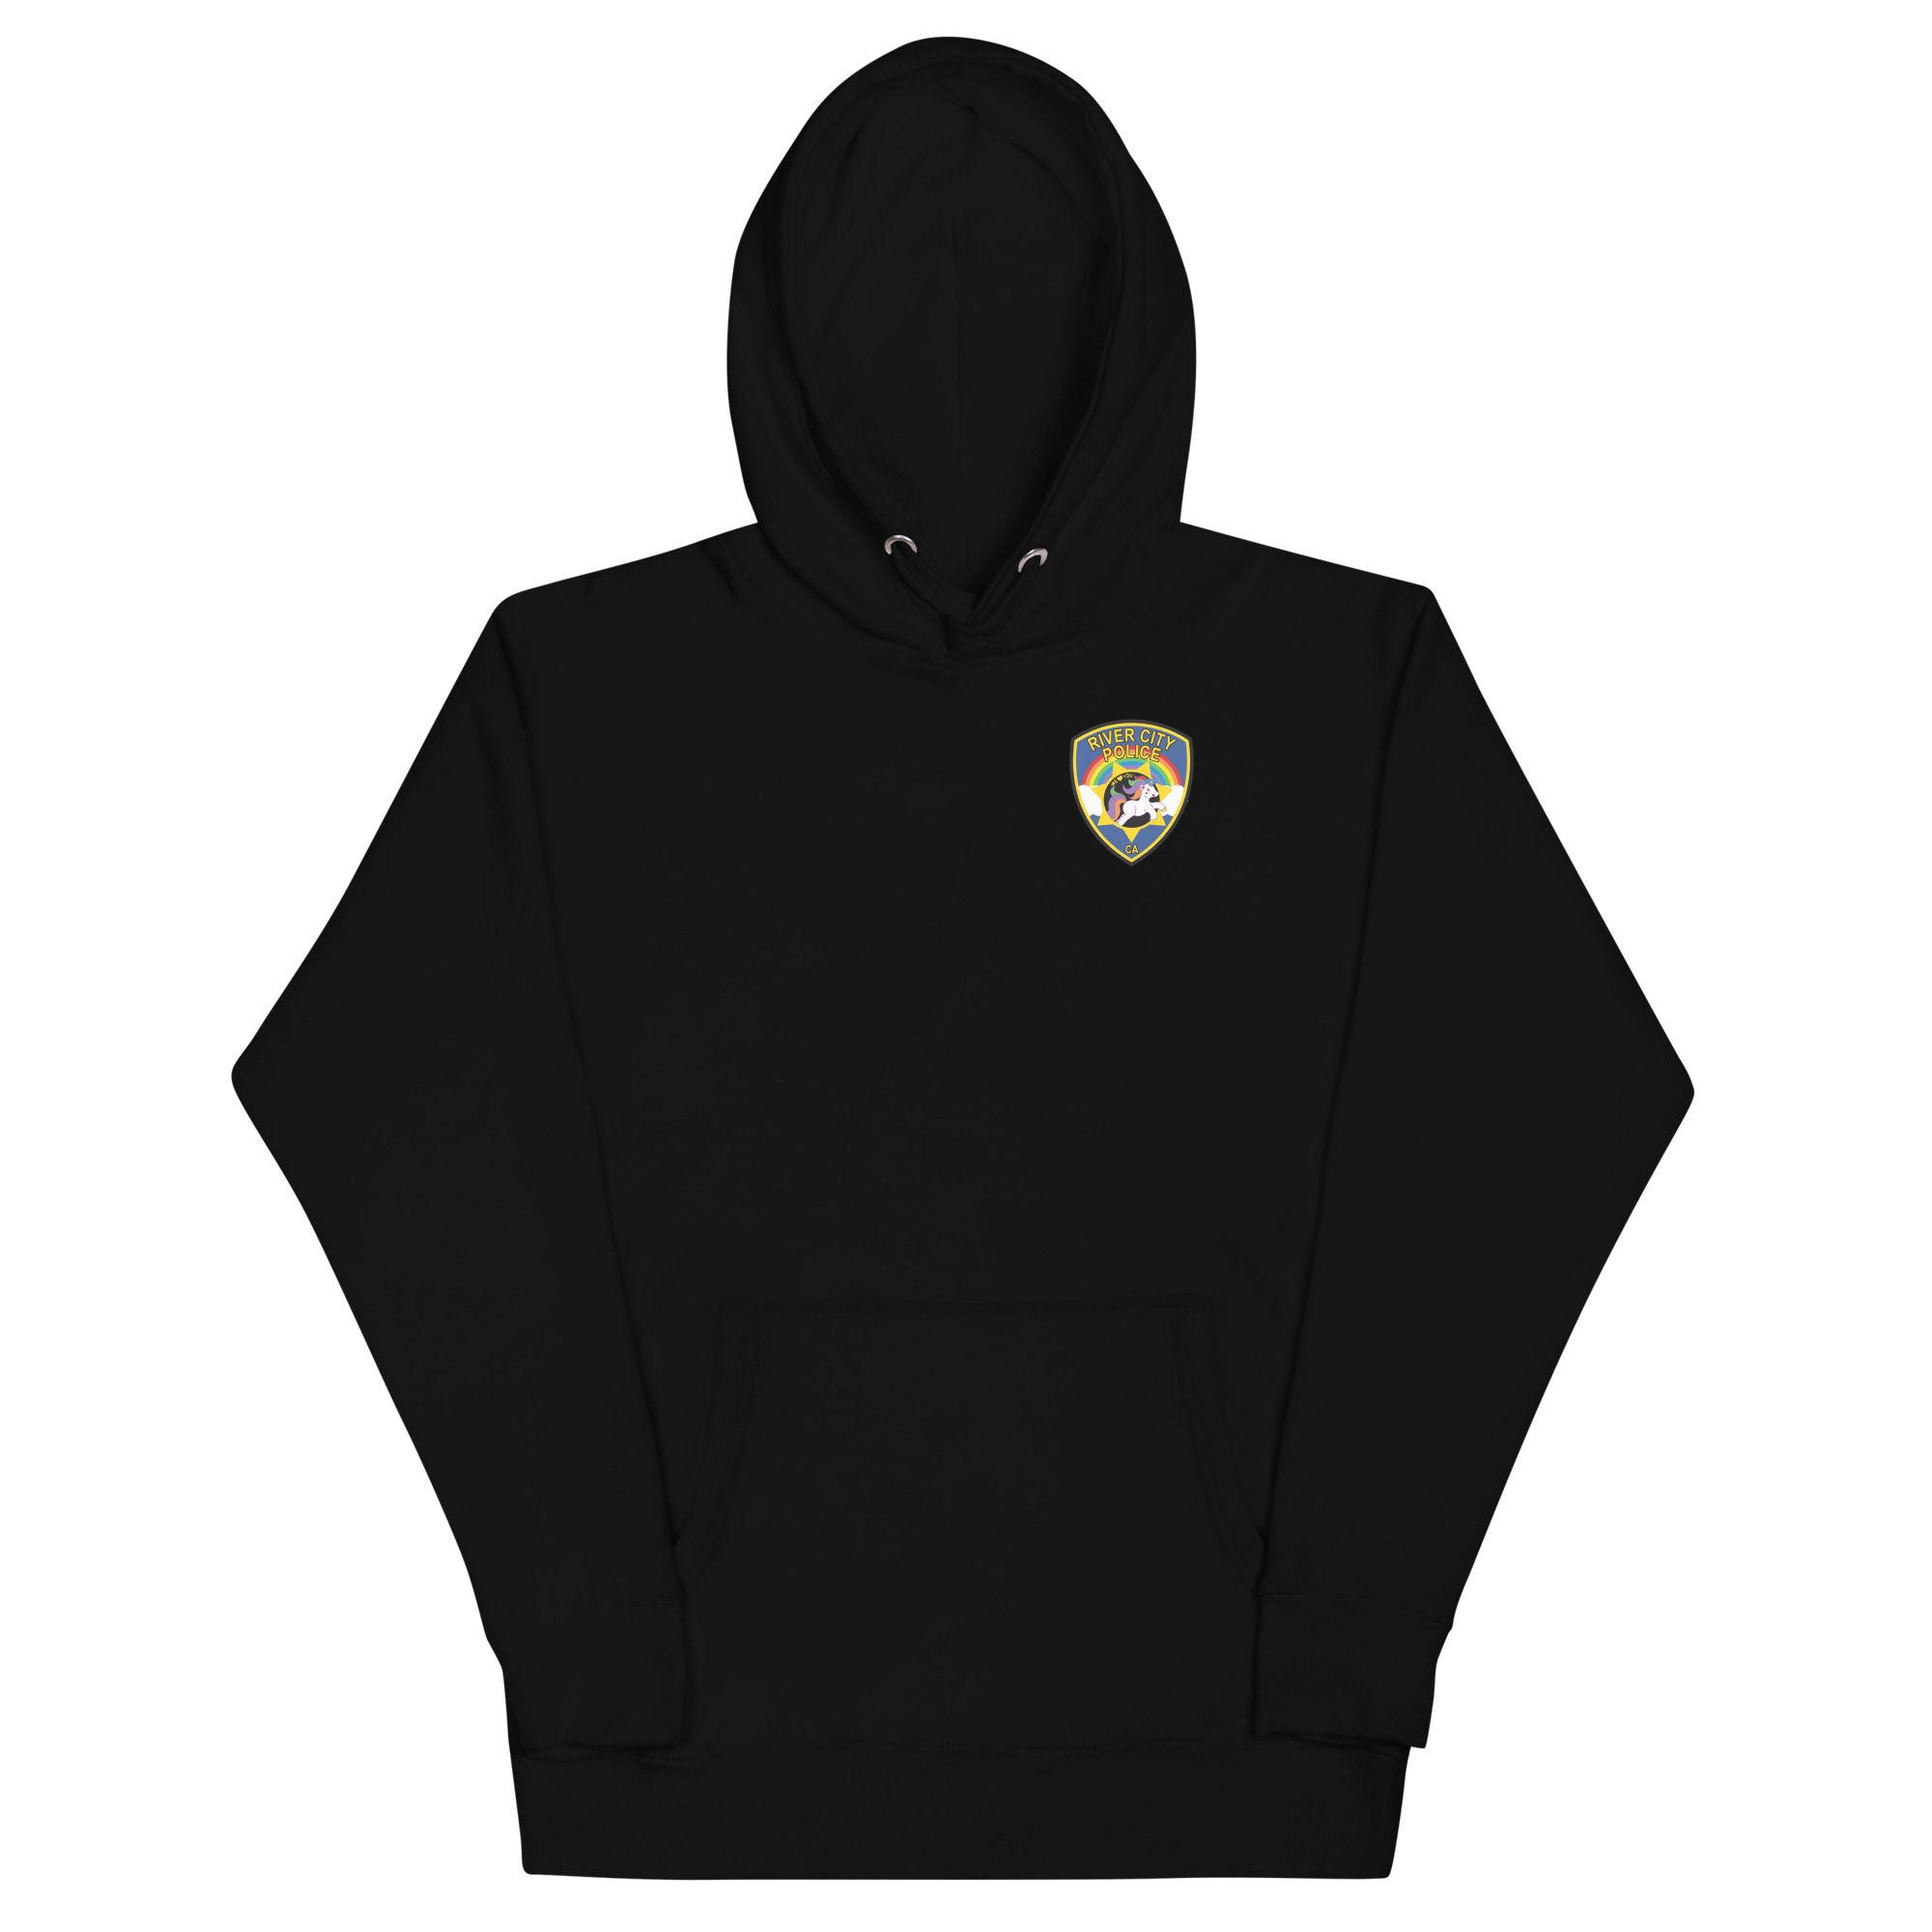 RCPD Narcotics Unit Hoodie - River City Police Department